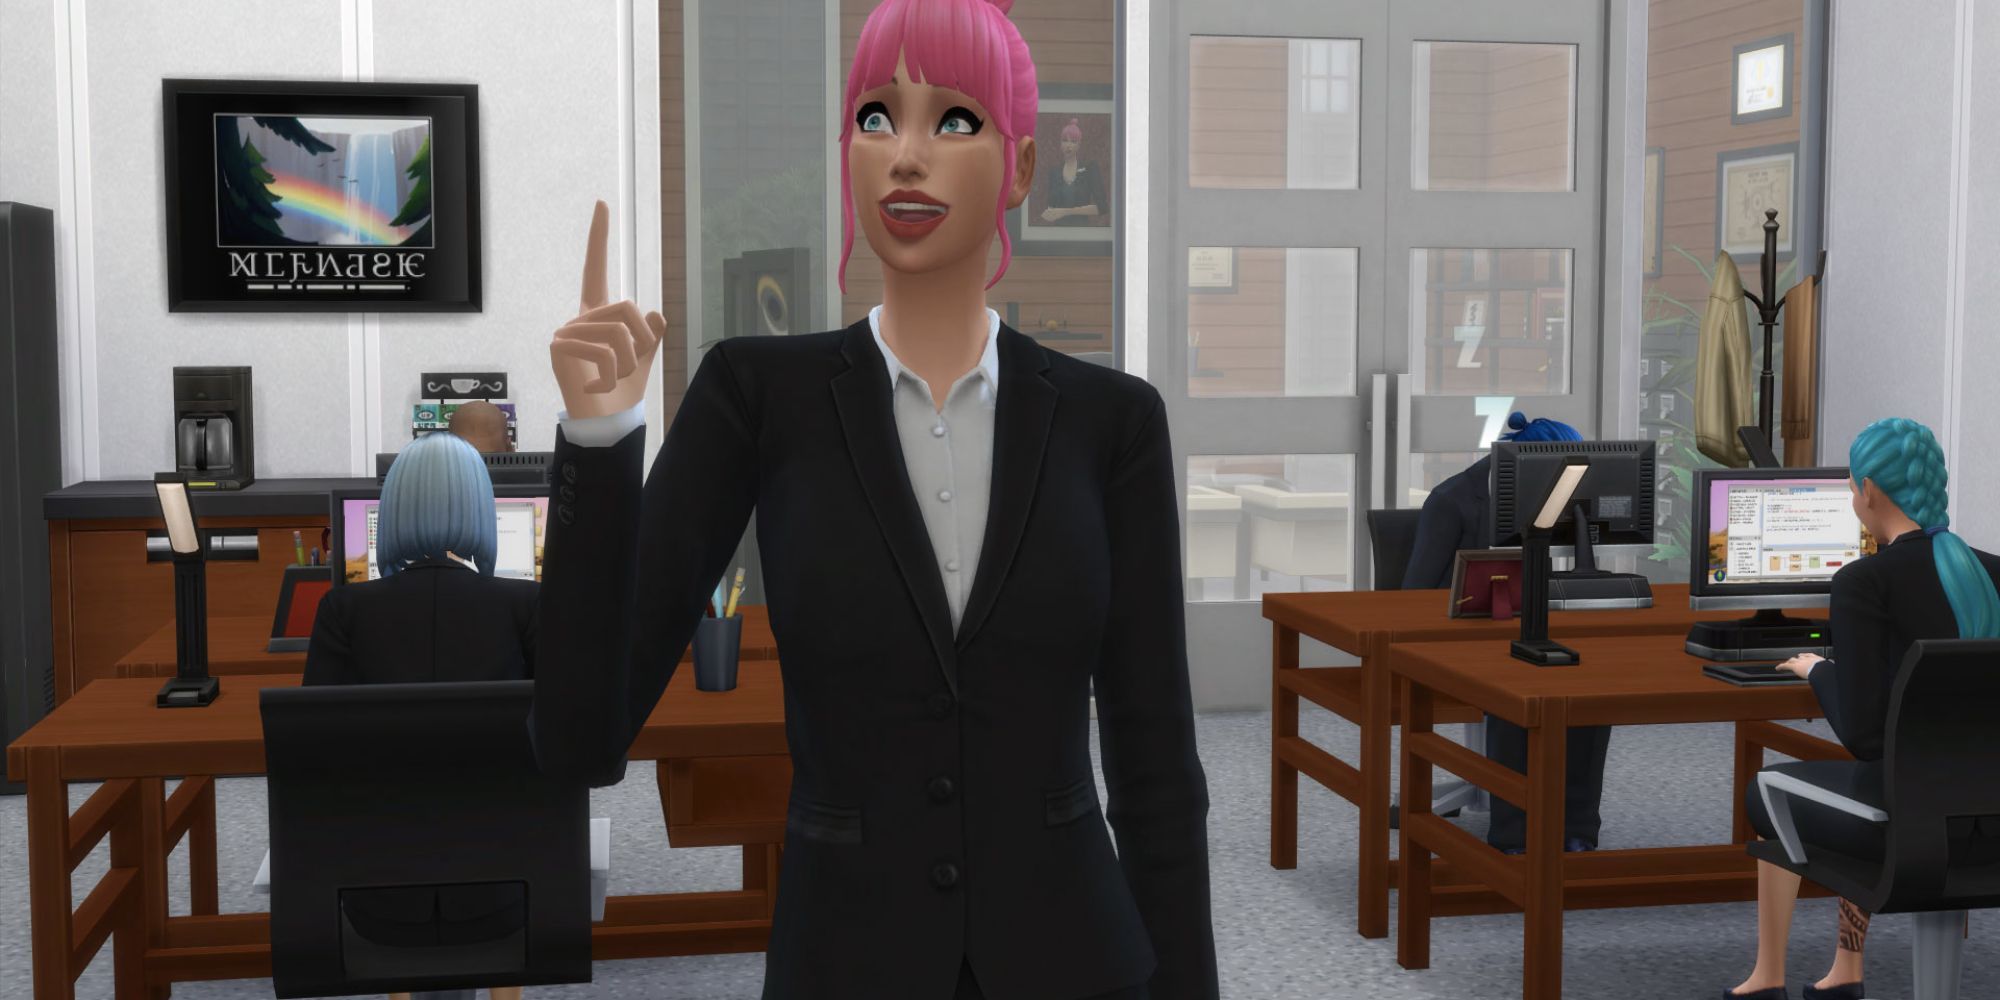 The Sims 4 Salaryperson Career